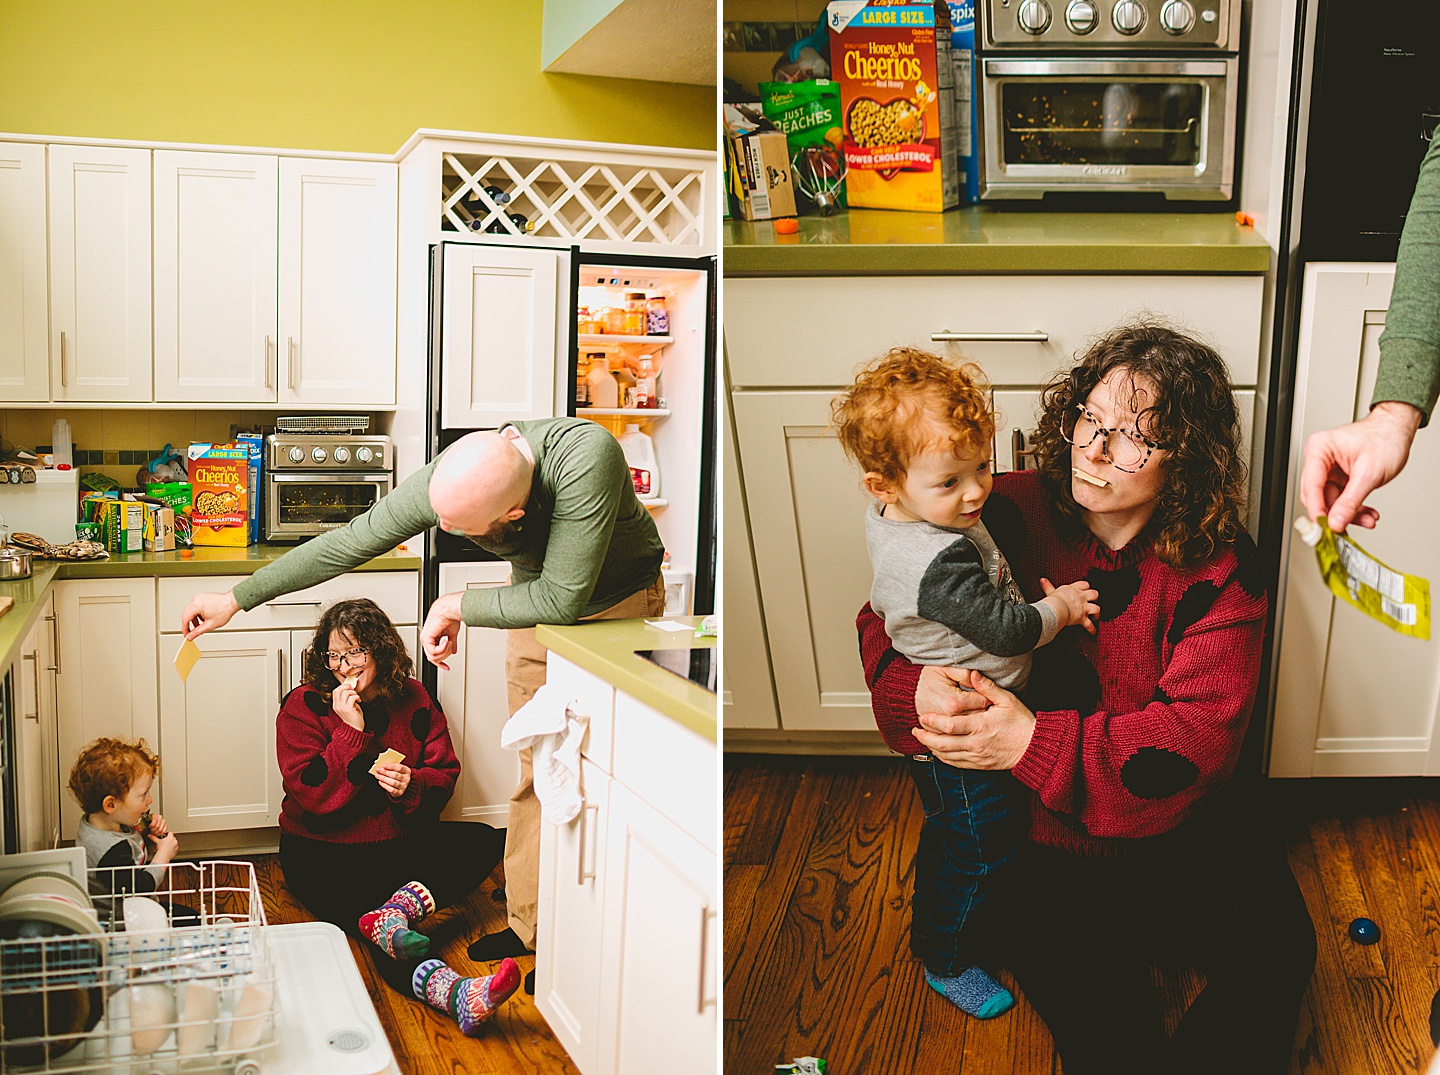 Parents eating snack with kid in the kitchen